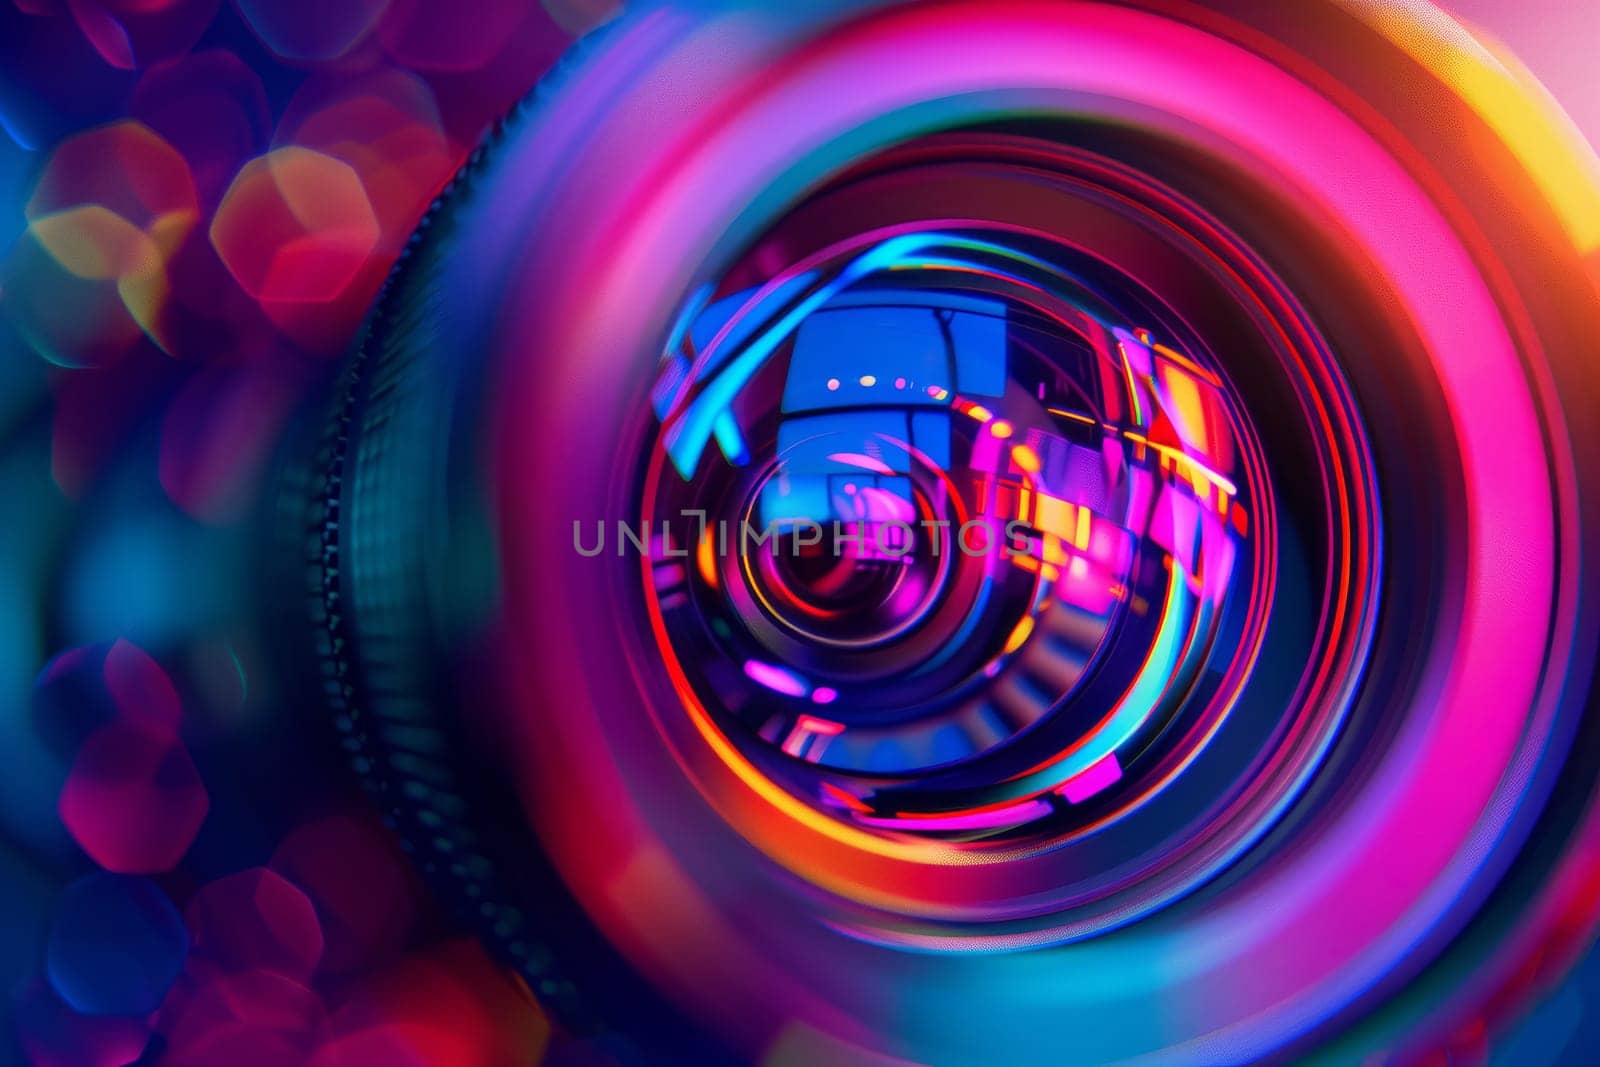 Closeup of a camera lens against a vibrant purple and magenta background by richwolf